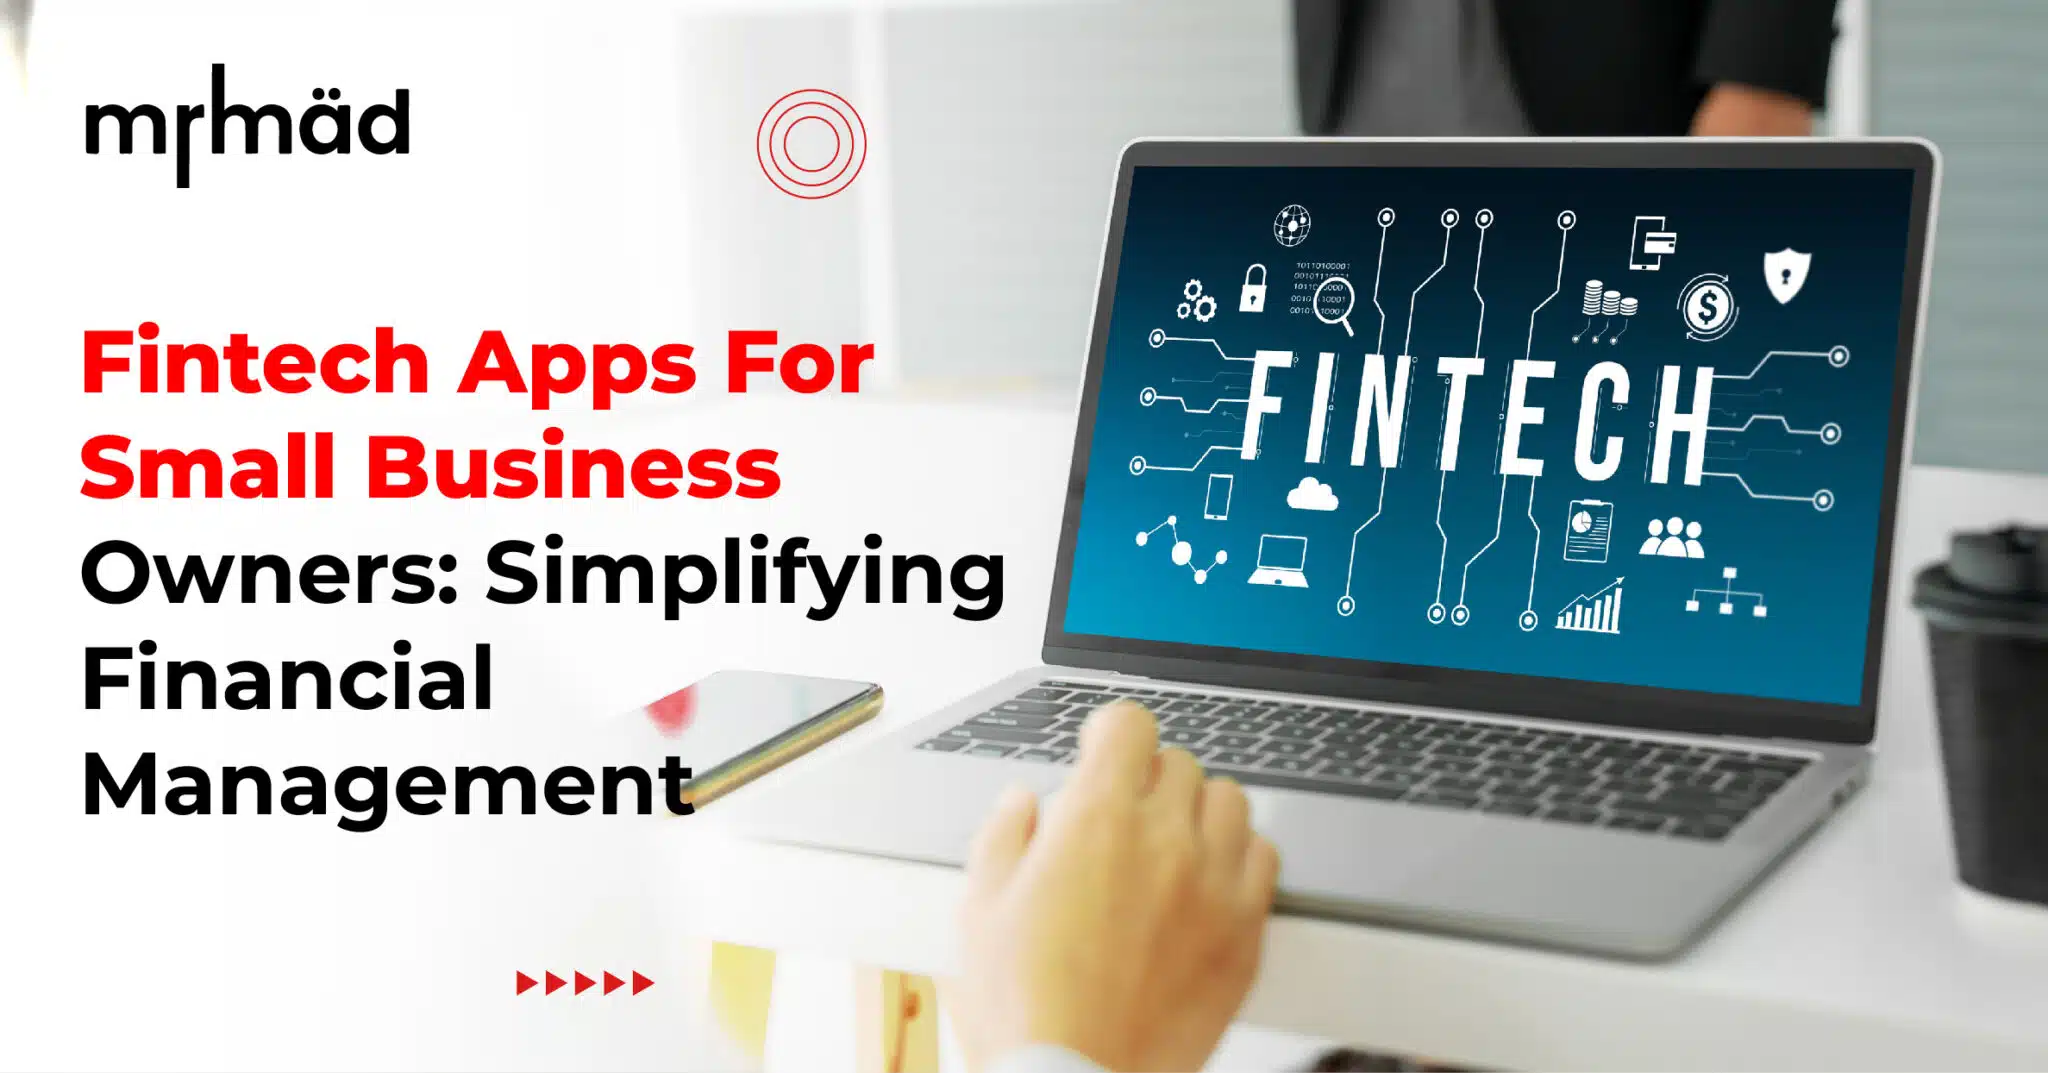 Fintech Apps For Small Business Owners: Simplifying Financial Management